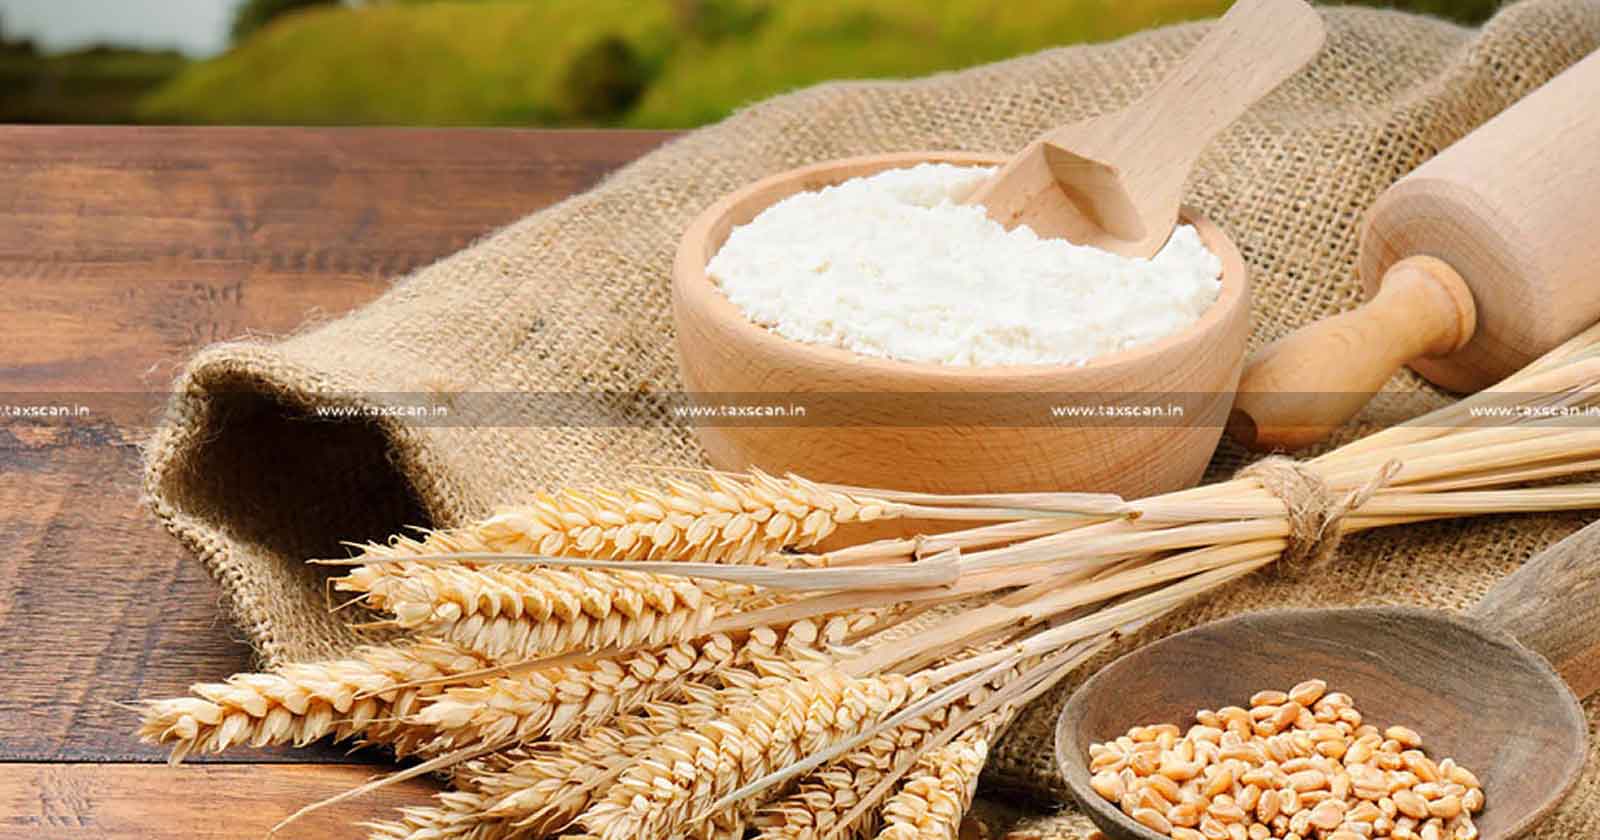 Composite Supply - Supply - Composite Supply for Conversion - Conversion - Conversion of Wheat to Atta - taxscan